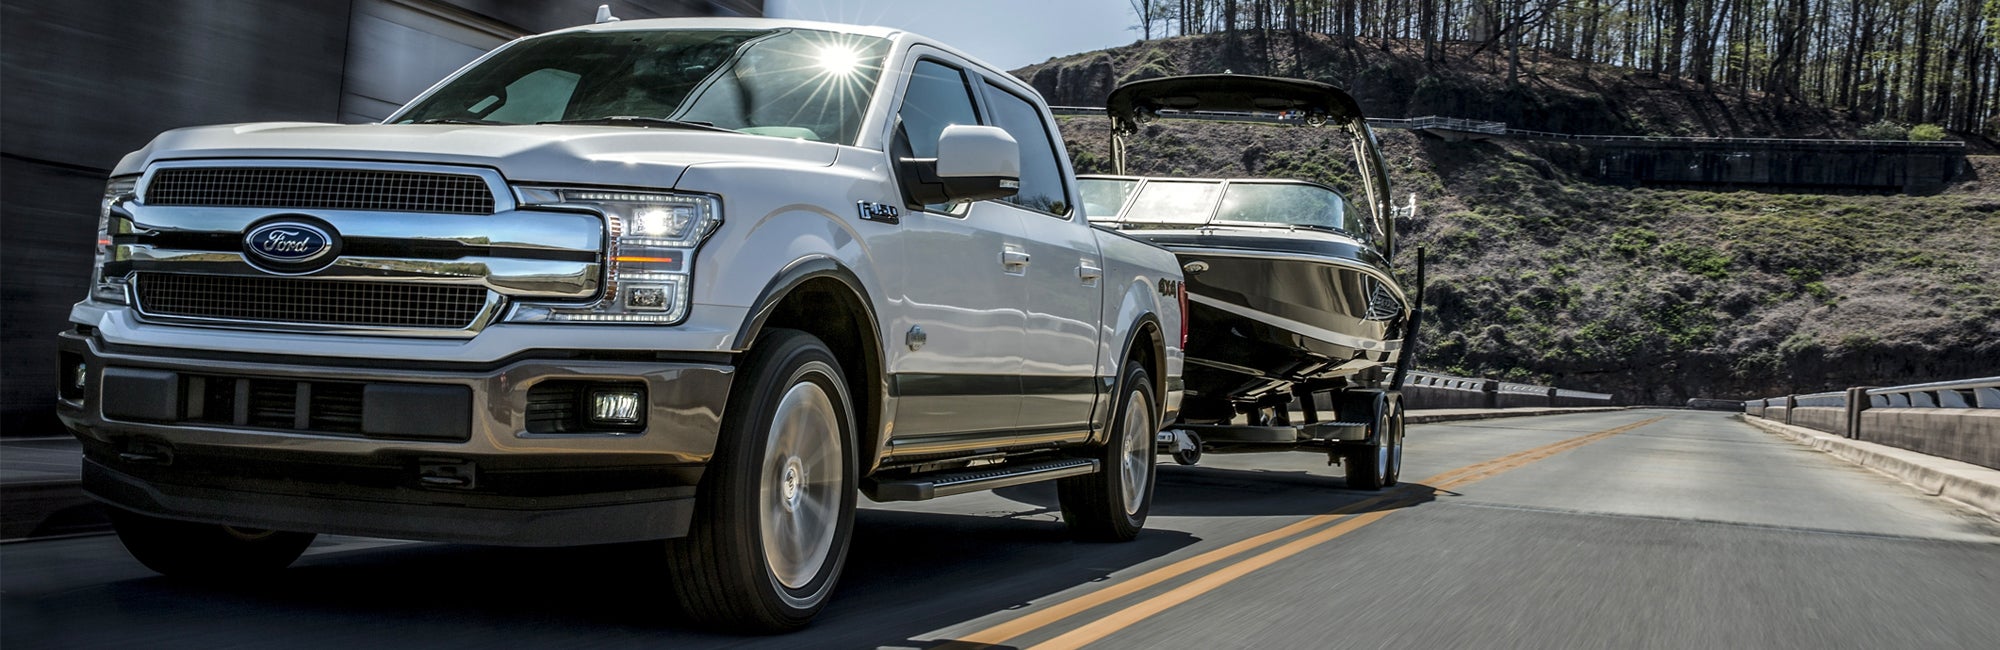 2020 Ford F-150 | Towing Capacity & More | Buss Ford 2020 Ford F 150 3.5 Towing Capacity